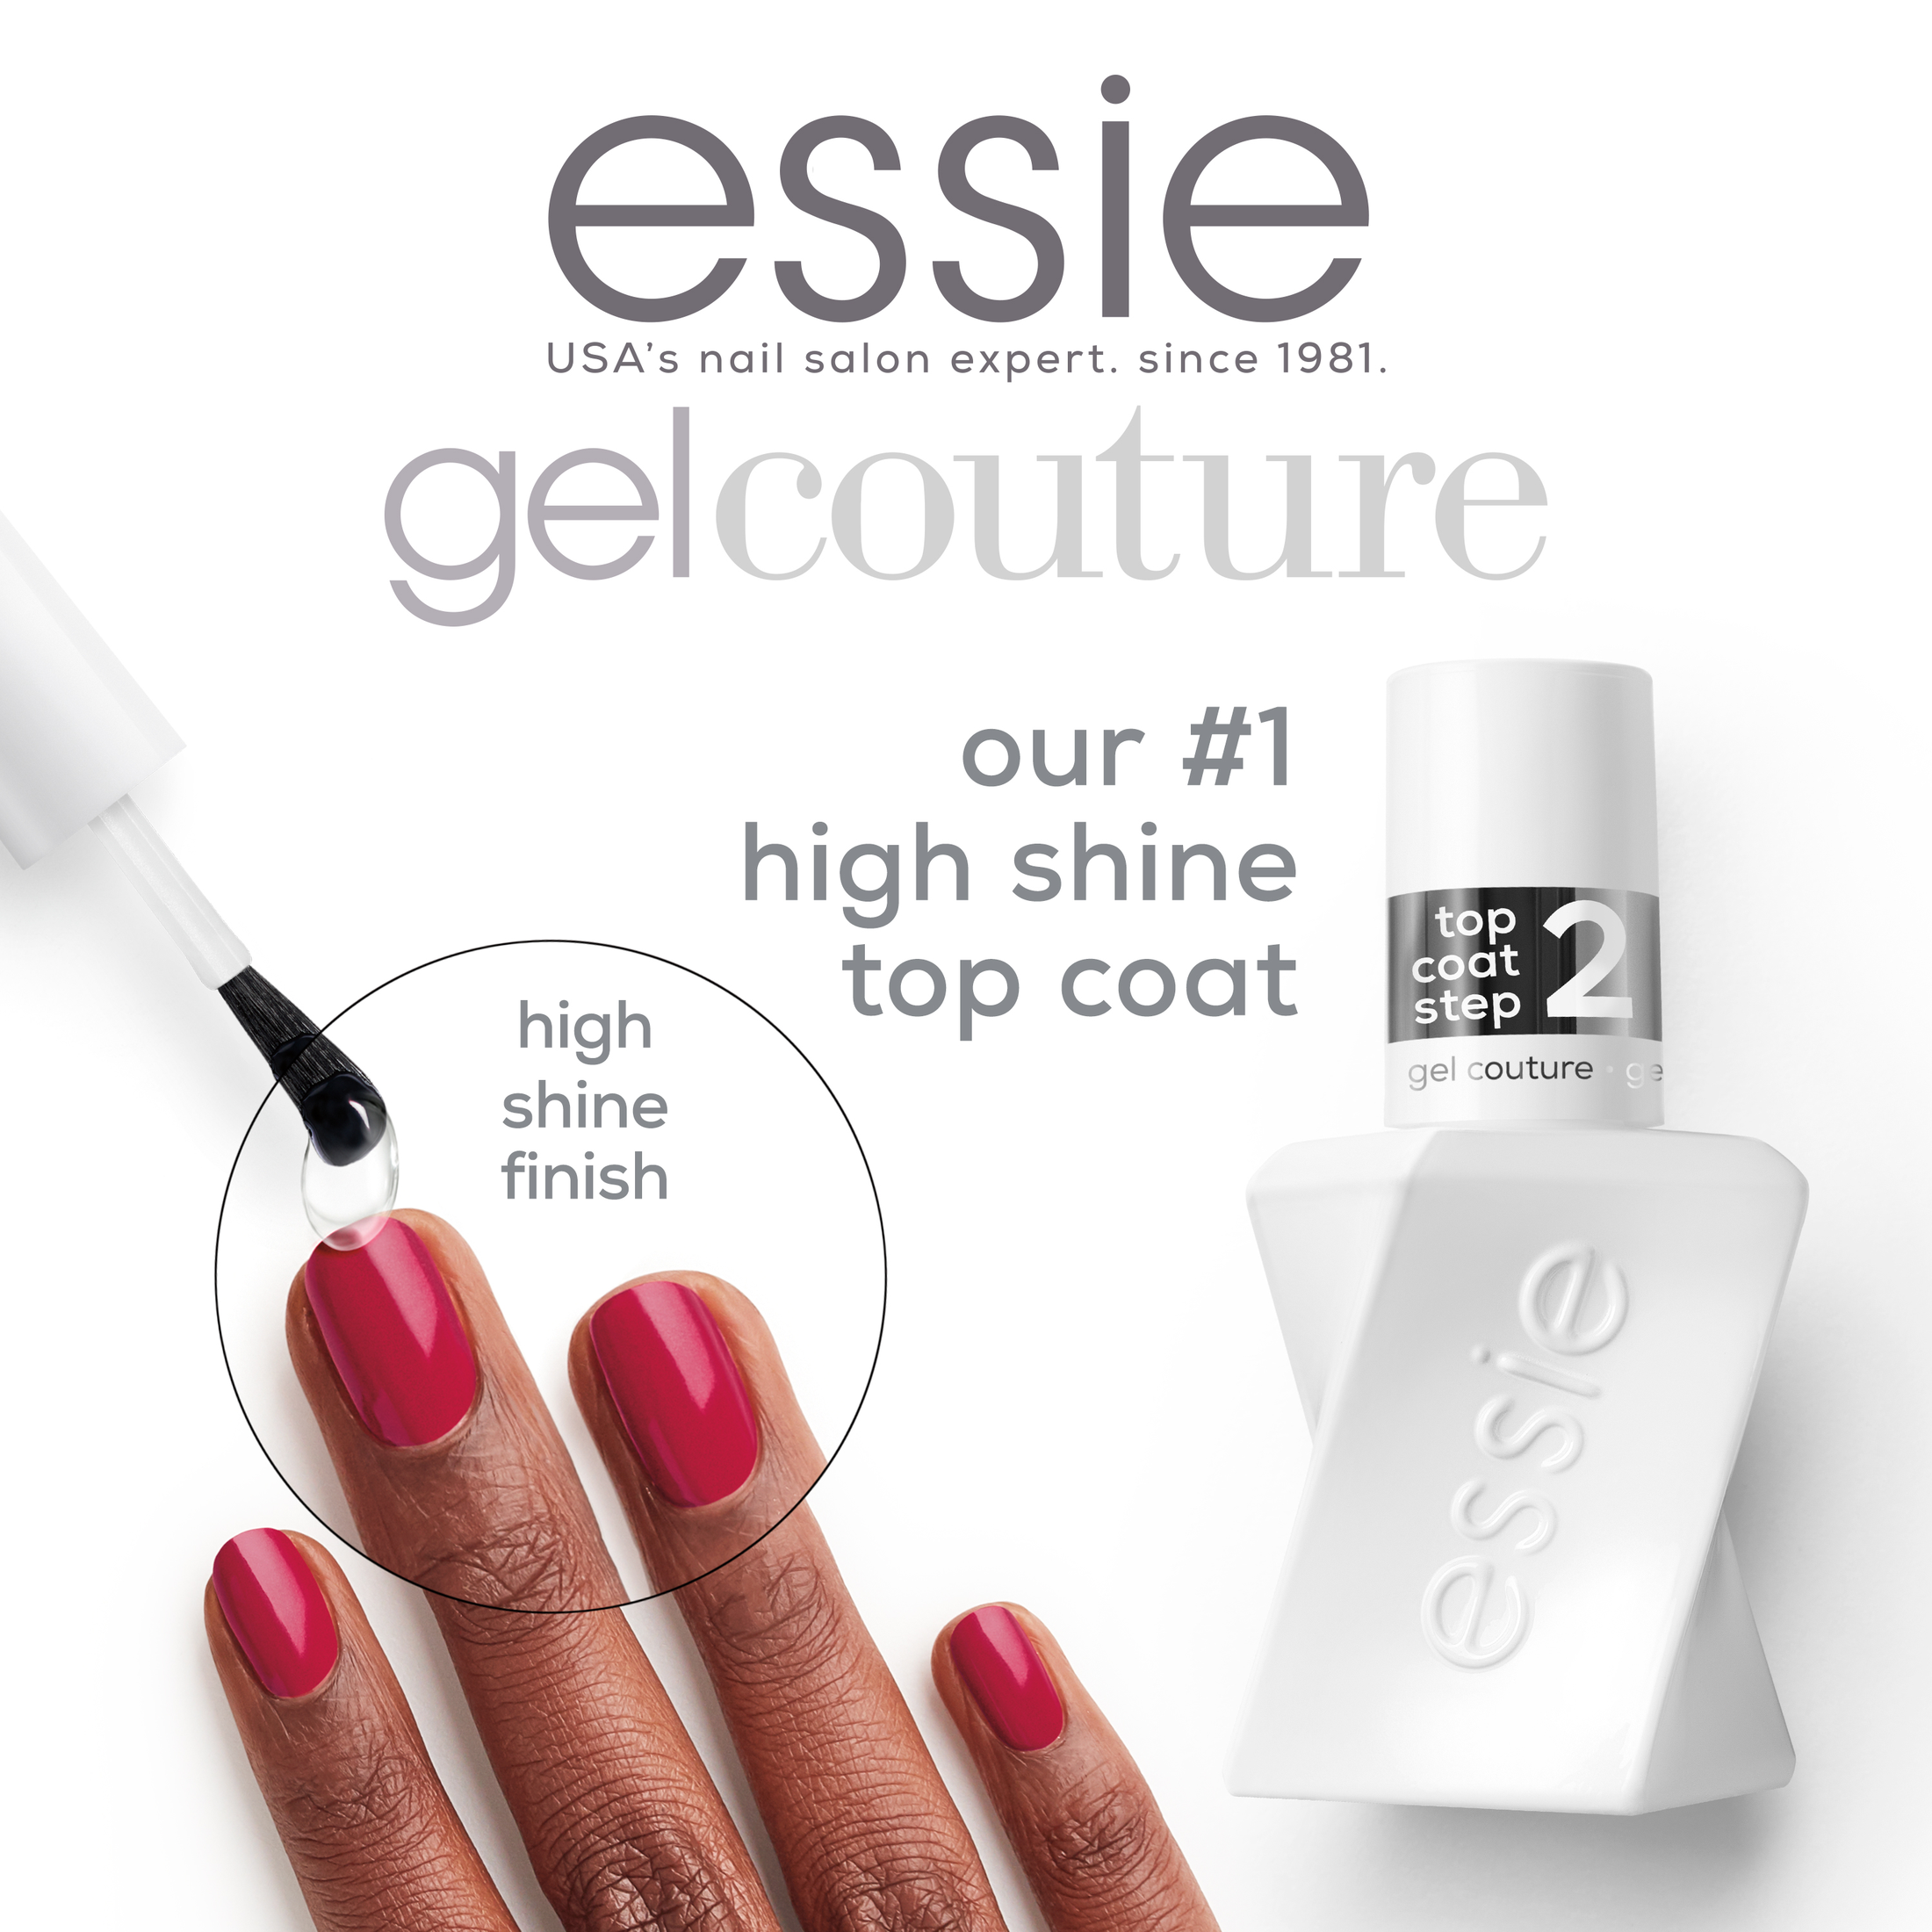 essie Gel Couture Nail Polish, Clear, Shiny Top Coat, 0.46 fl oz Bottle - image 3 of 9